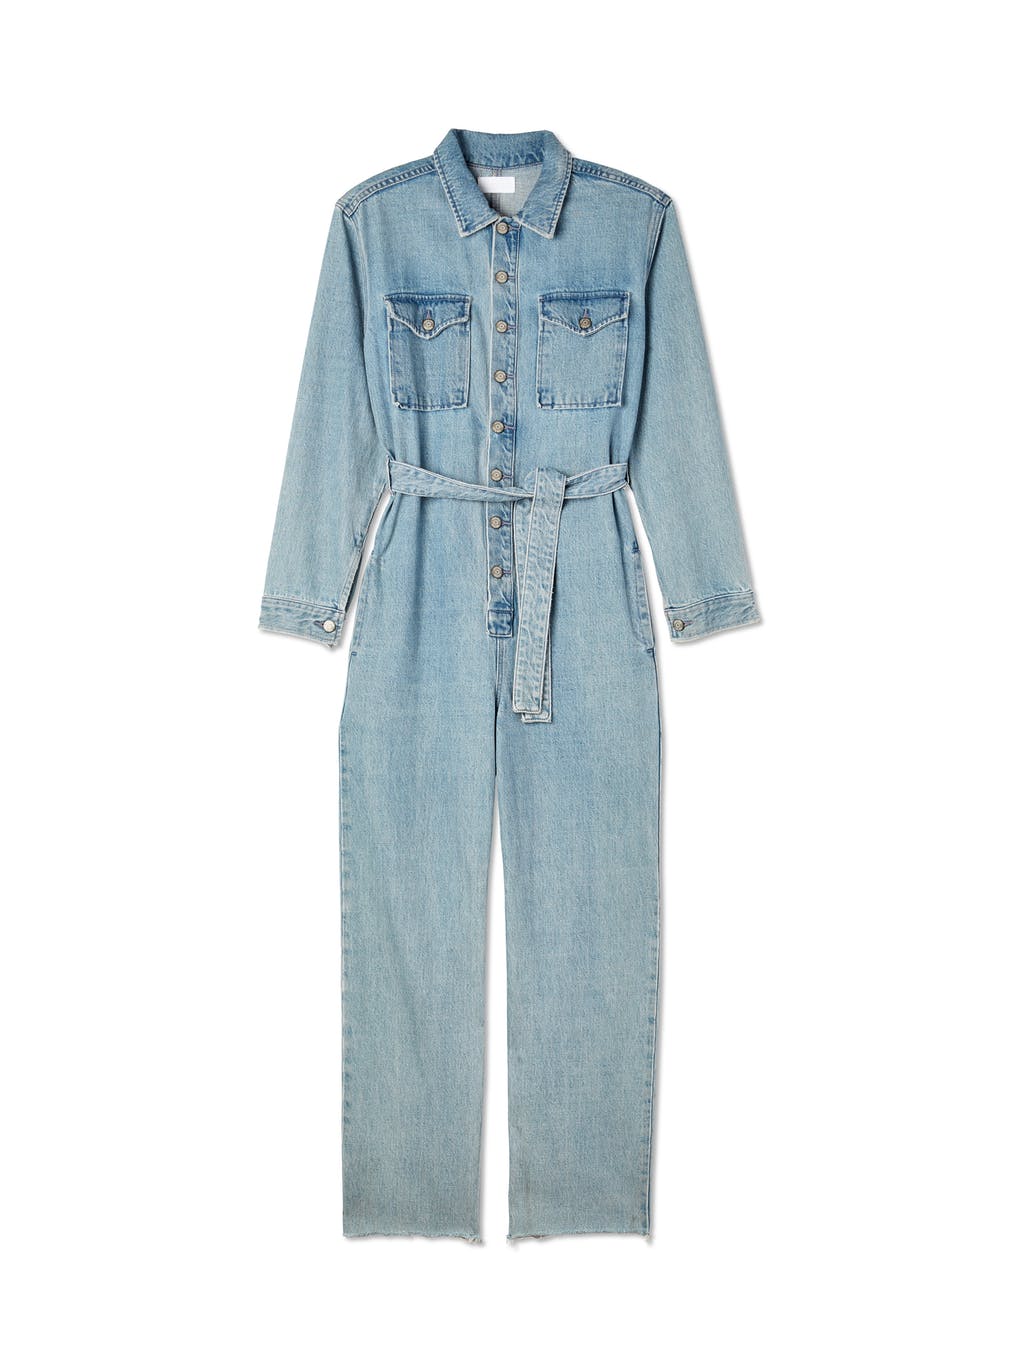 The Guy Jeans Coverall